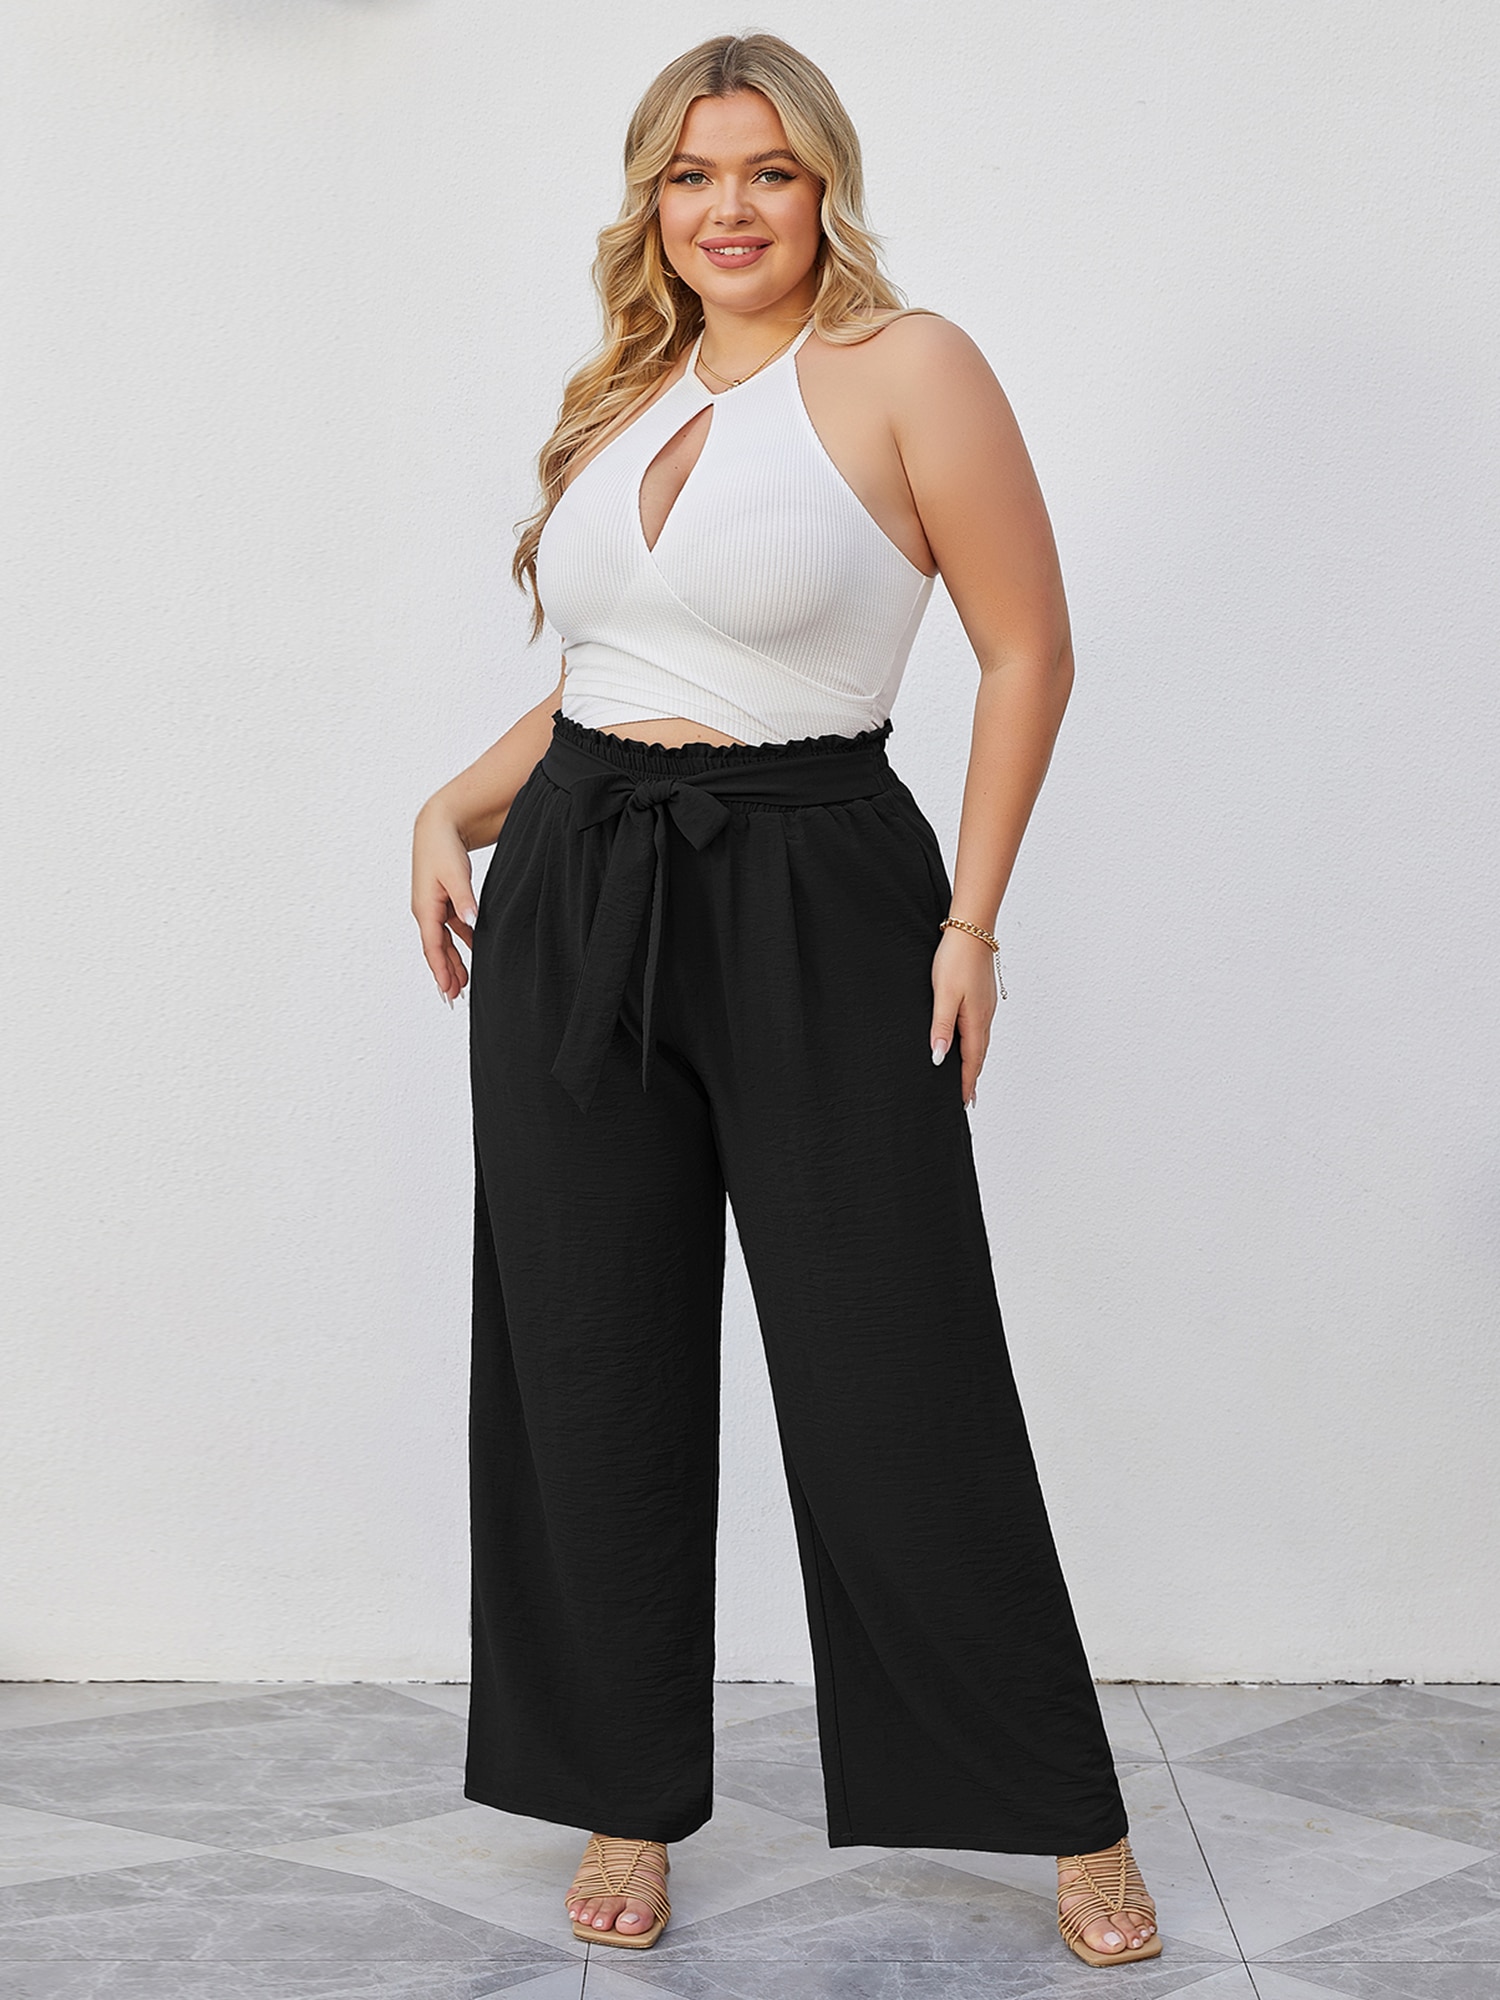 Chiclily Belted Wide Leg Pants for Women High Waisted Business Casual ...